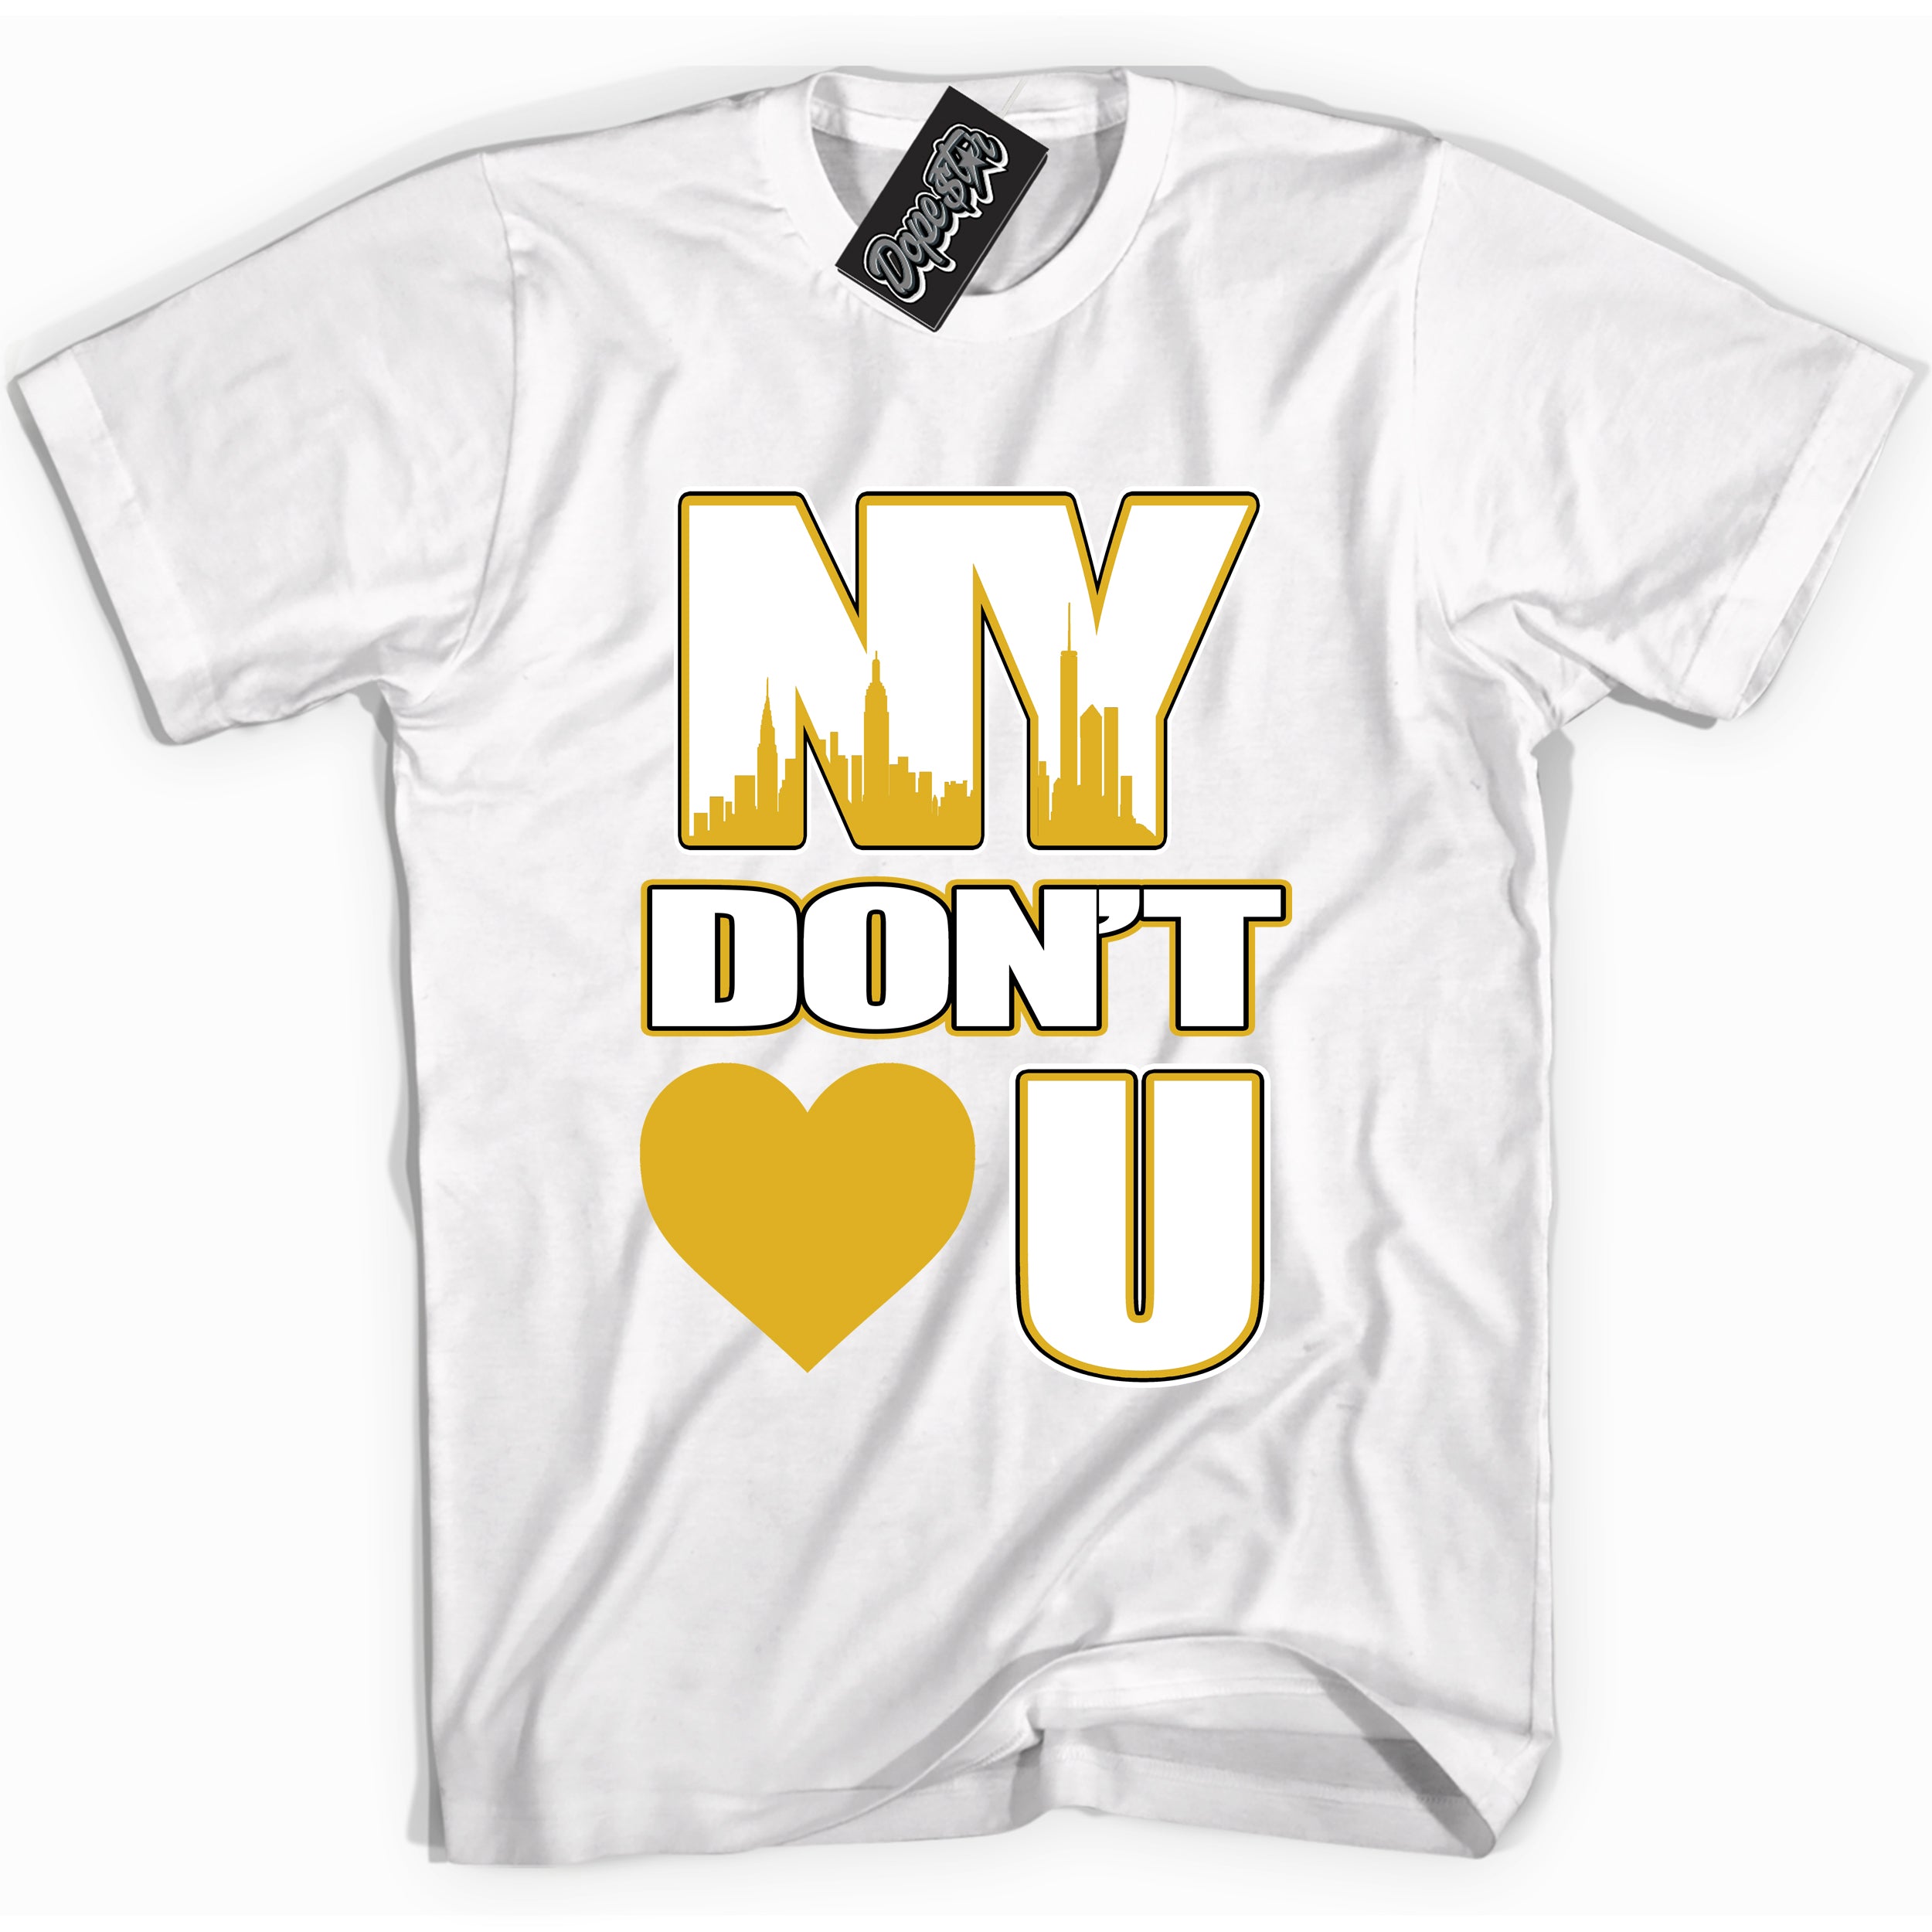 Cool White Shirt with “ NY Don't Love You” design that perfectly matches Yellow Ochre 6s Sneakers.